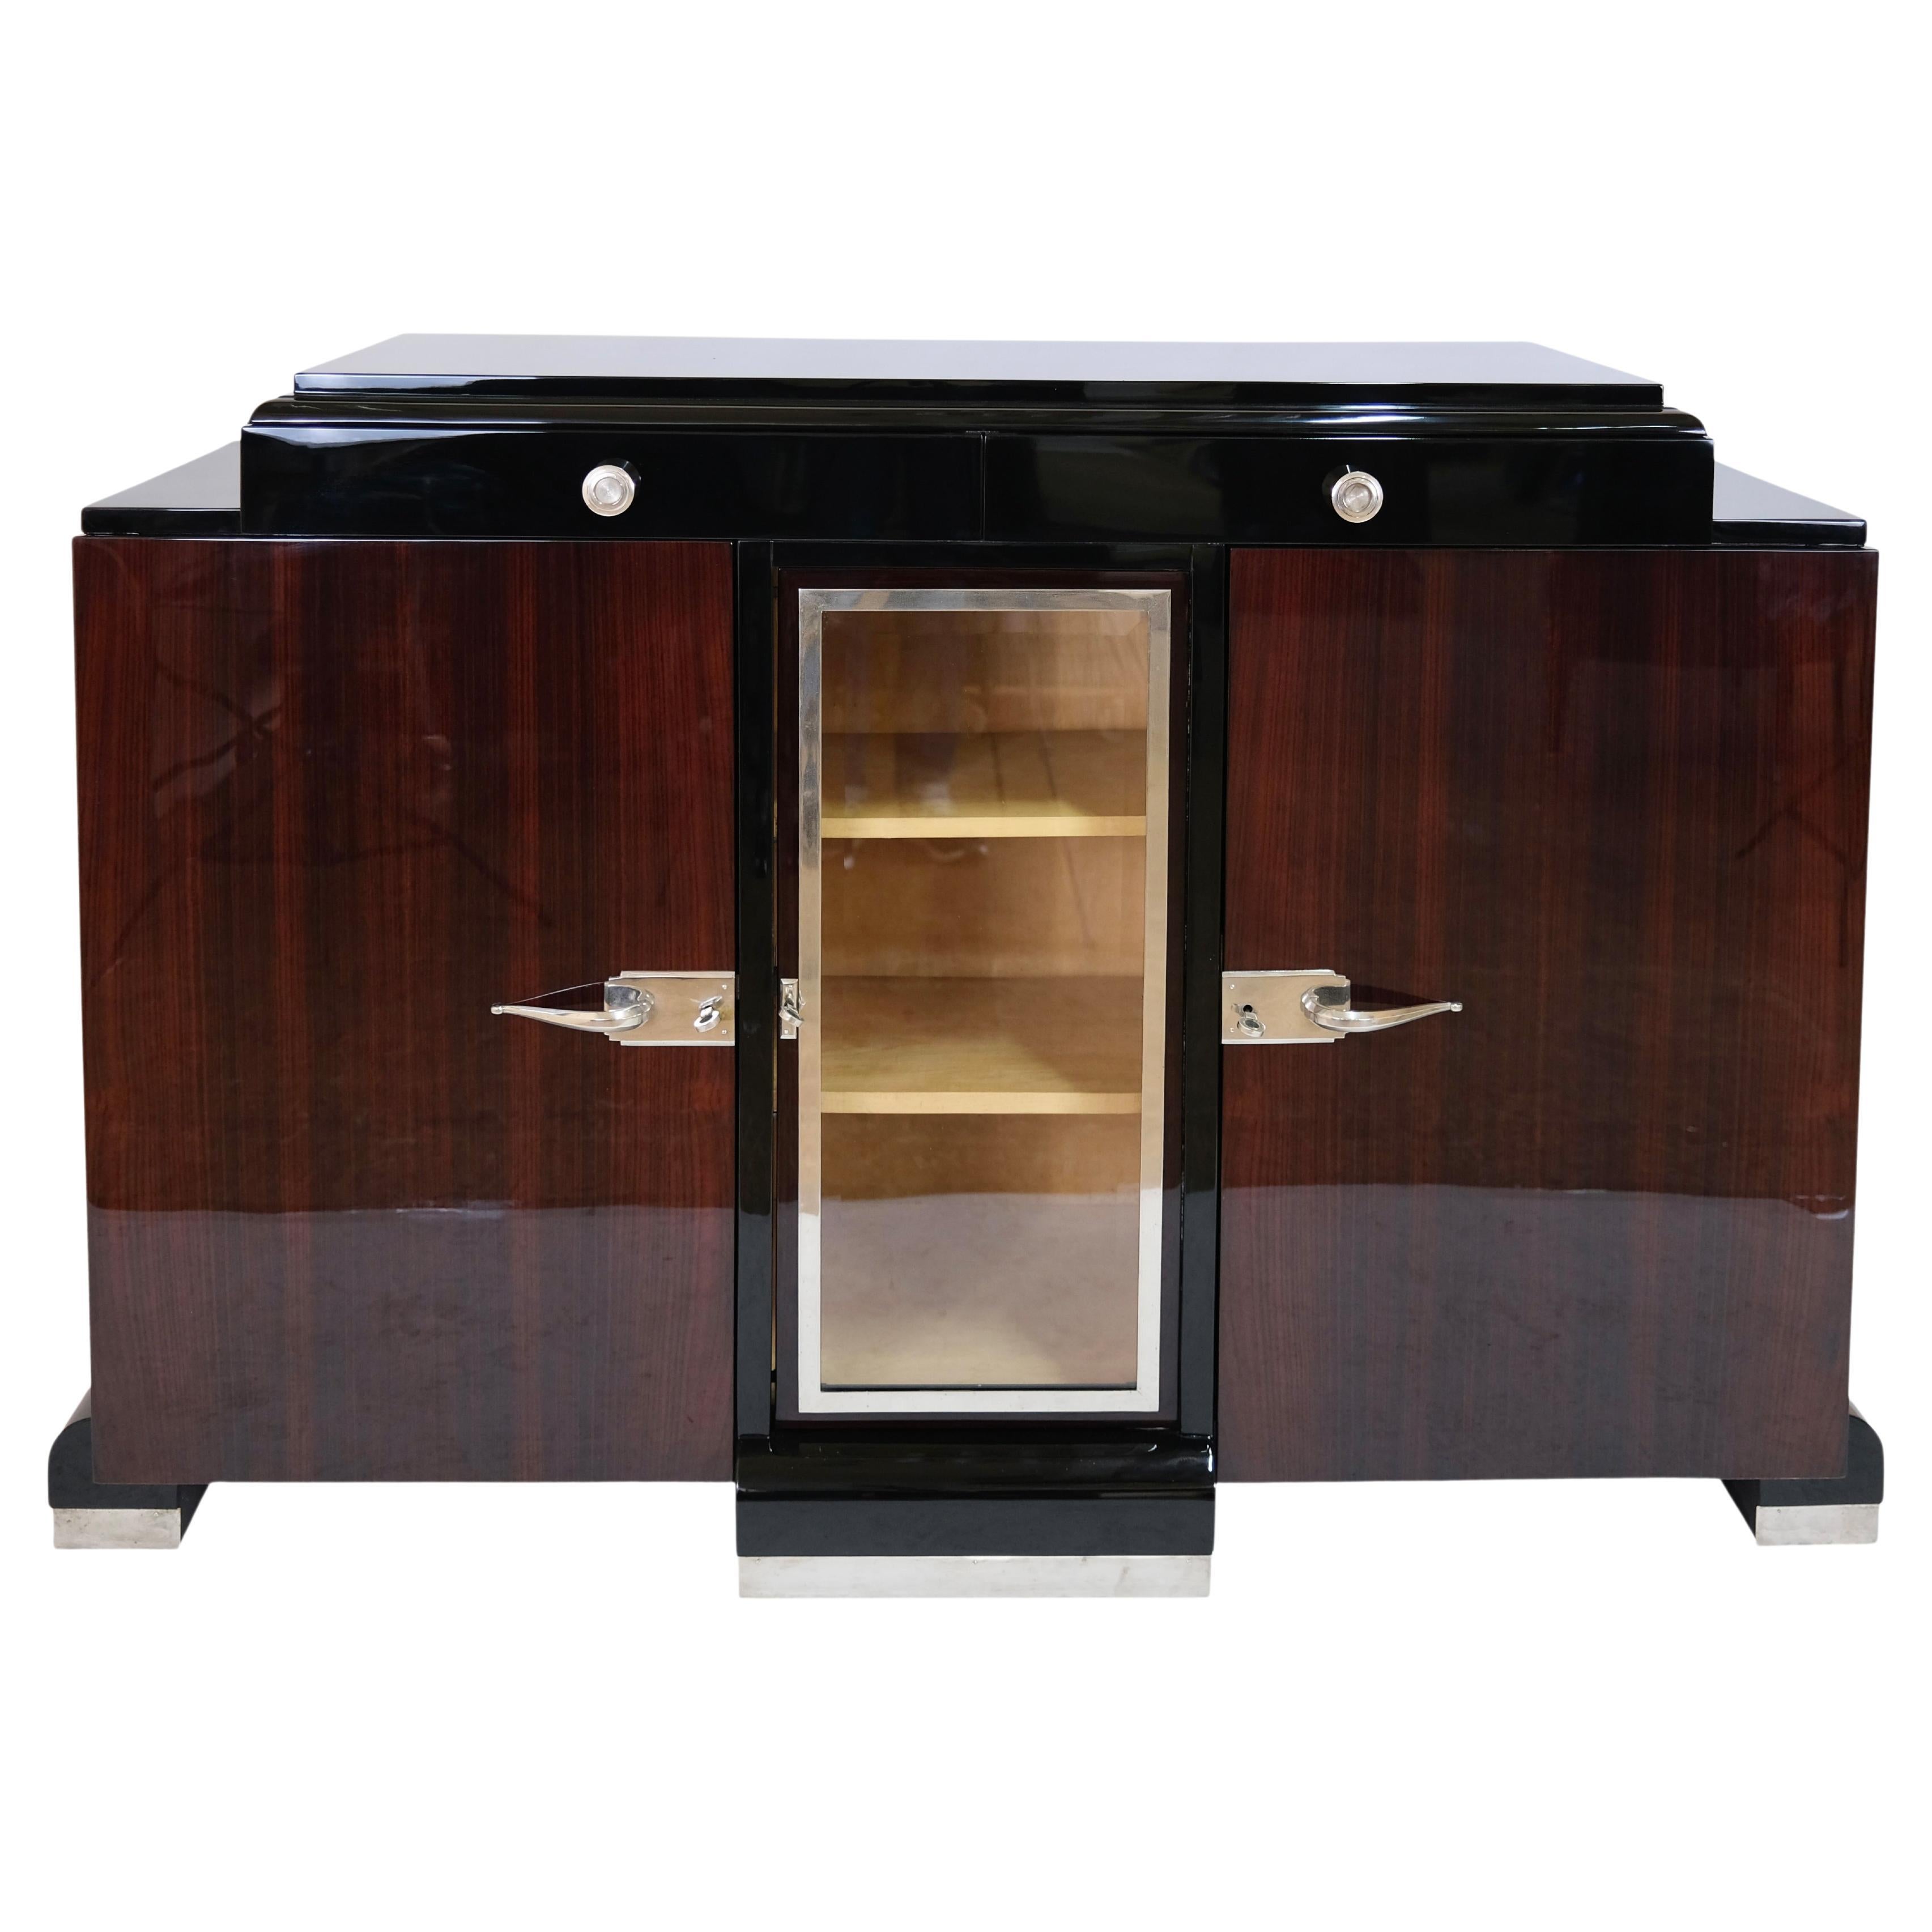 French 1930s Art Deco Two Doored Sideboard with Display Cabinet and Drawers